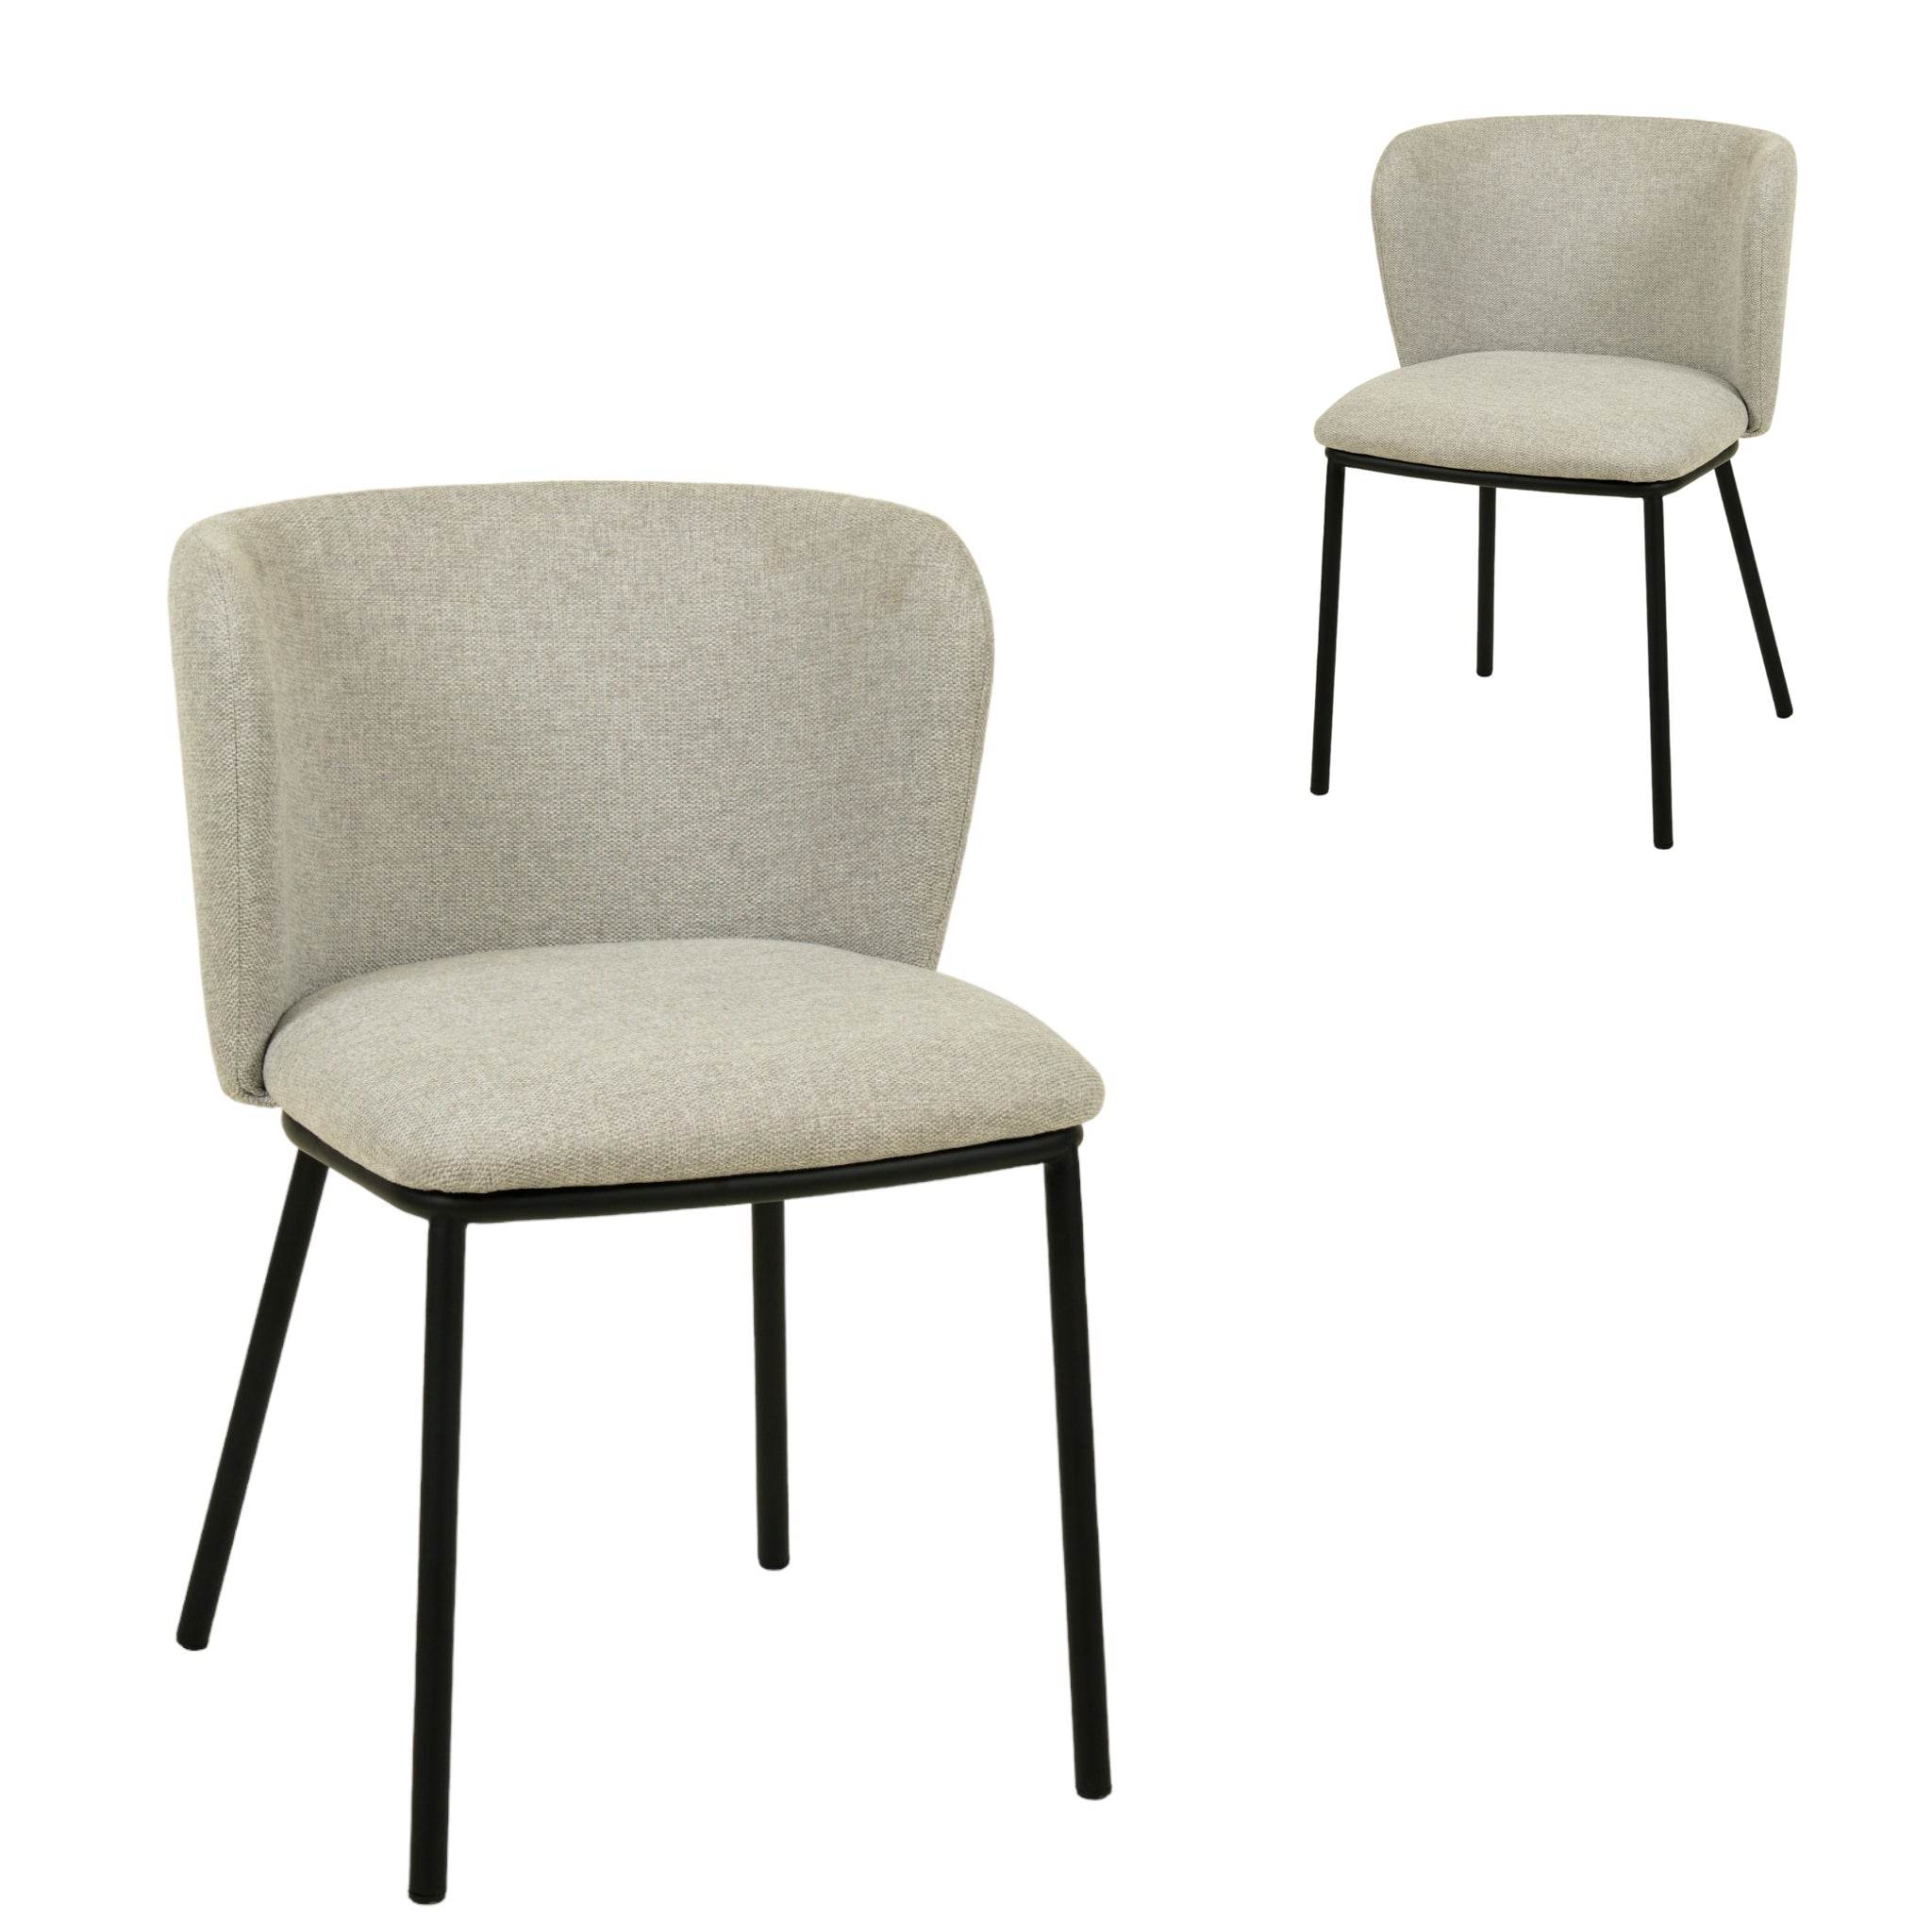 Set of 2 James Fabric Dining Chair - Coastal Light Grey - Dining Chairs